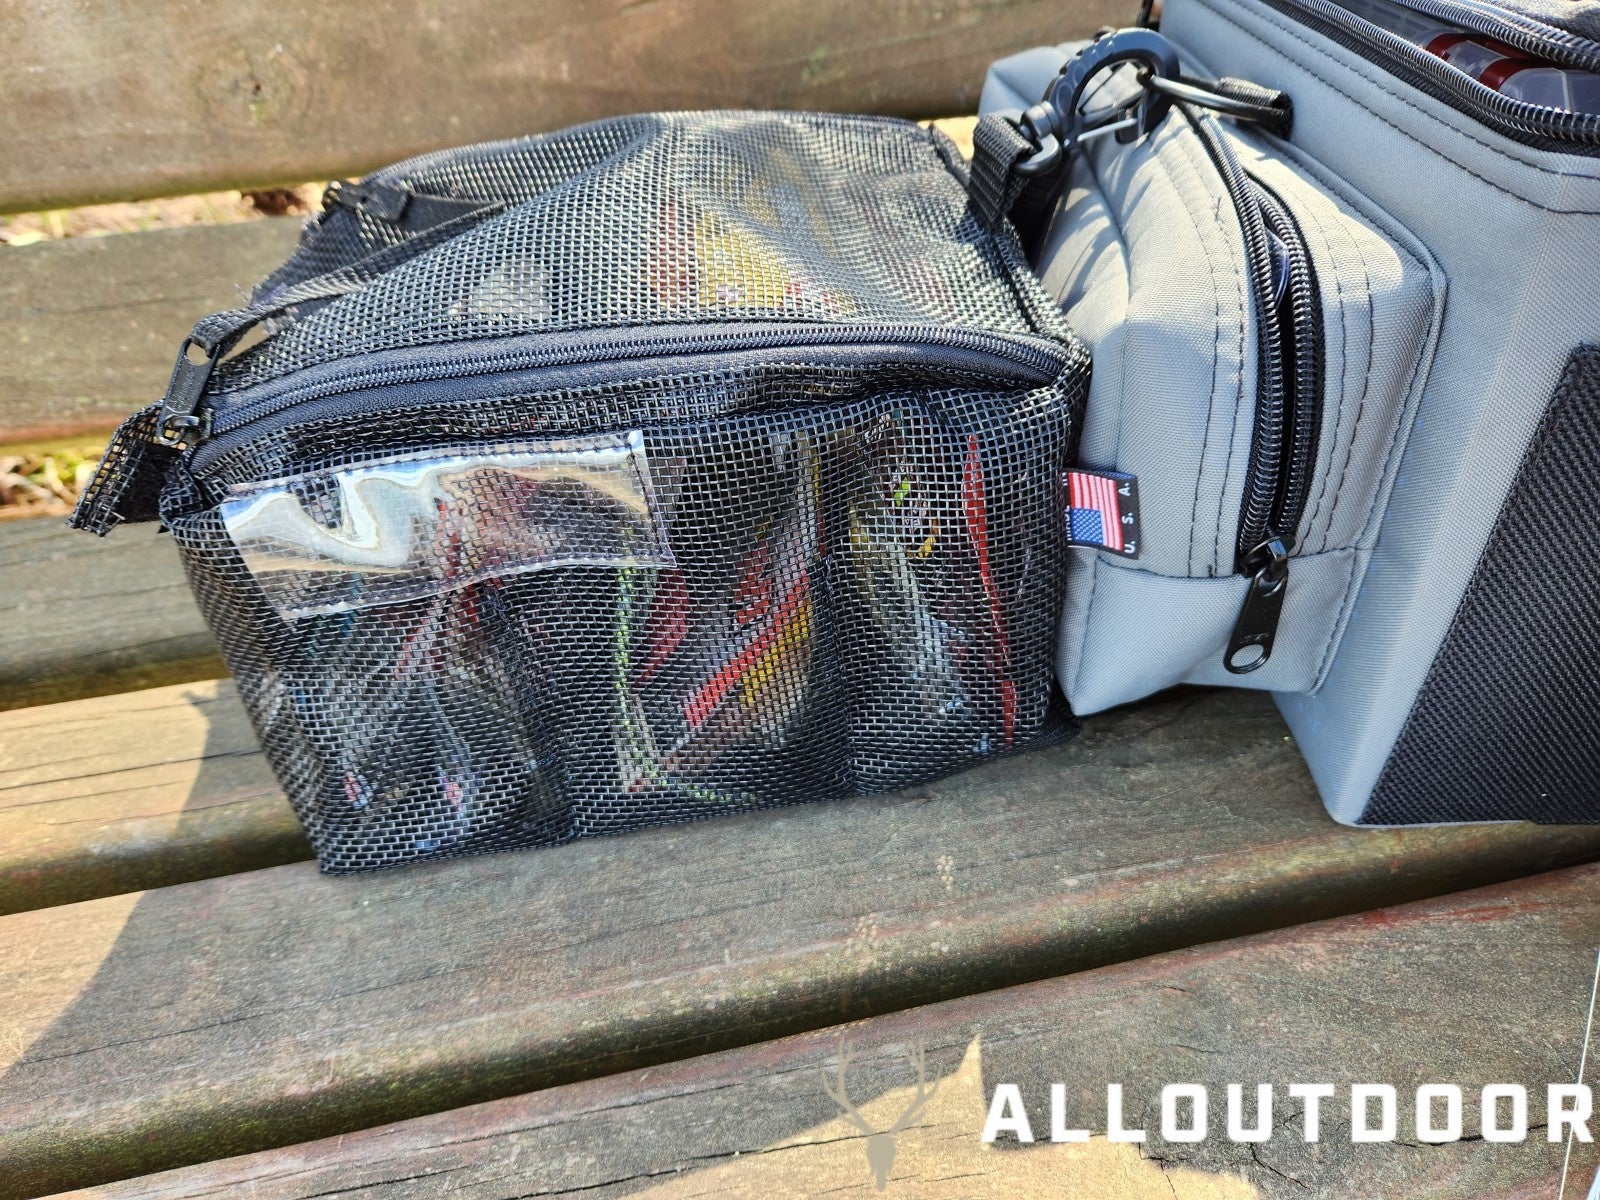 AllOutdoor Review: Lakewood Billfold - Storage Solution for Baits